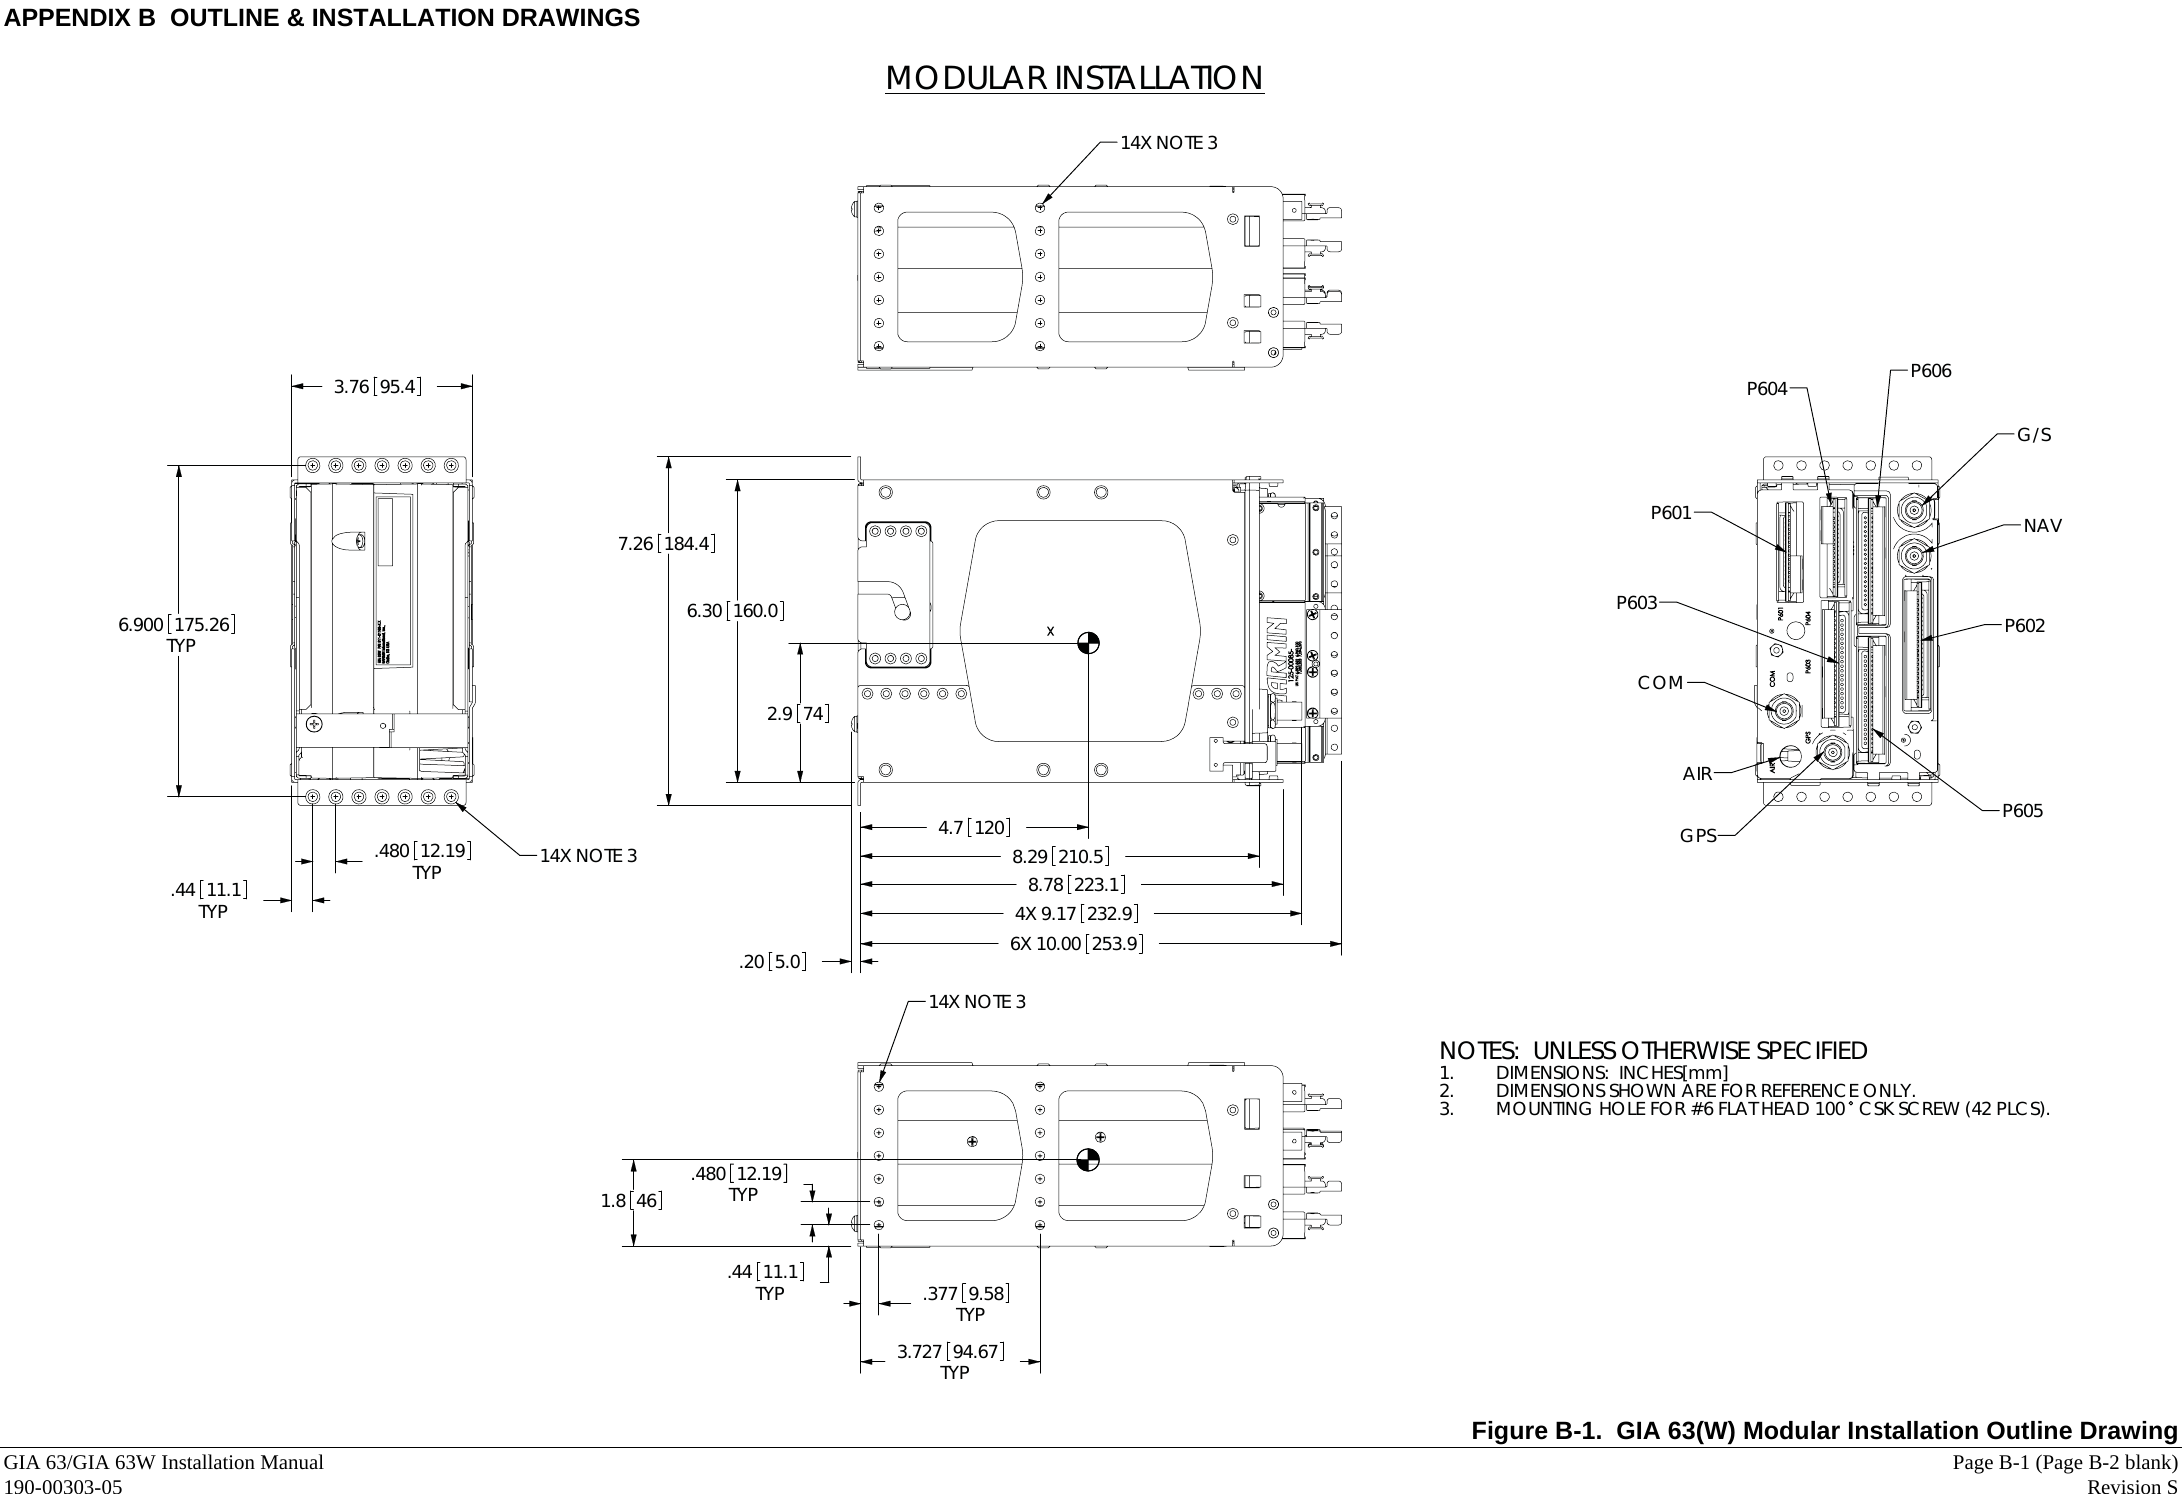 APPENDIX B  OUTLINE &amp; INSTALLATION DRAWINGS GIA 63/GIA 63W Installation Manual     Page B-1 (Page B-2 blank) 190-00303-05   Revision S  1.8 462.9 744.7 12014X NOTE 3.480 12.19TYP9.58TYP.37794.673.727TYP.44 11.1TYPMODULAR INSTALLATION14X NOTE 312.19TYP175.26TYP6.90011.1TYP.44.4803.76 95.414X NOTE 3P606P601P603COMAIRGPS P605P602NAVG/SP604MOUNTING HOLE FOR #6 FLAT HEAD 100  CSK SCREW (42 PLCS).3.NOTES:  UNLESS OTHERWISE SPECIFIEDDIMENSIONS:  INCHES[mm]1. DIMENSIONS SHOWN ARE FOR REFERENCE ONLY.2.10.00 253.9160.06.30184.47.26210.58.29 223.18.78 232.99.174X6X.20 5.0  Figure B-1.  GIA 63(W) Modular Installation Outline Drawing 